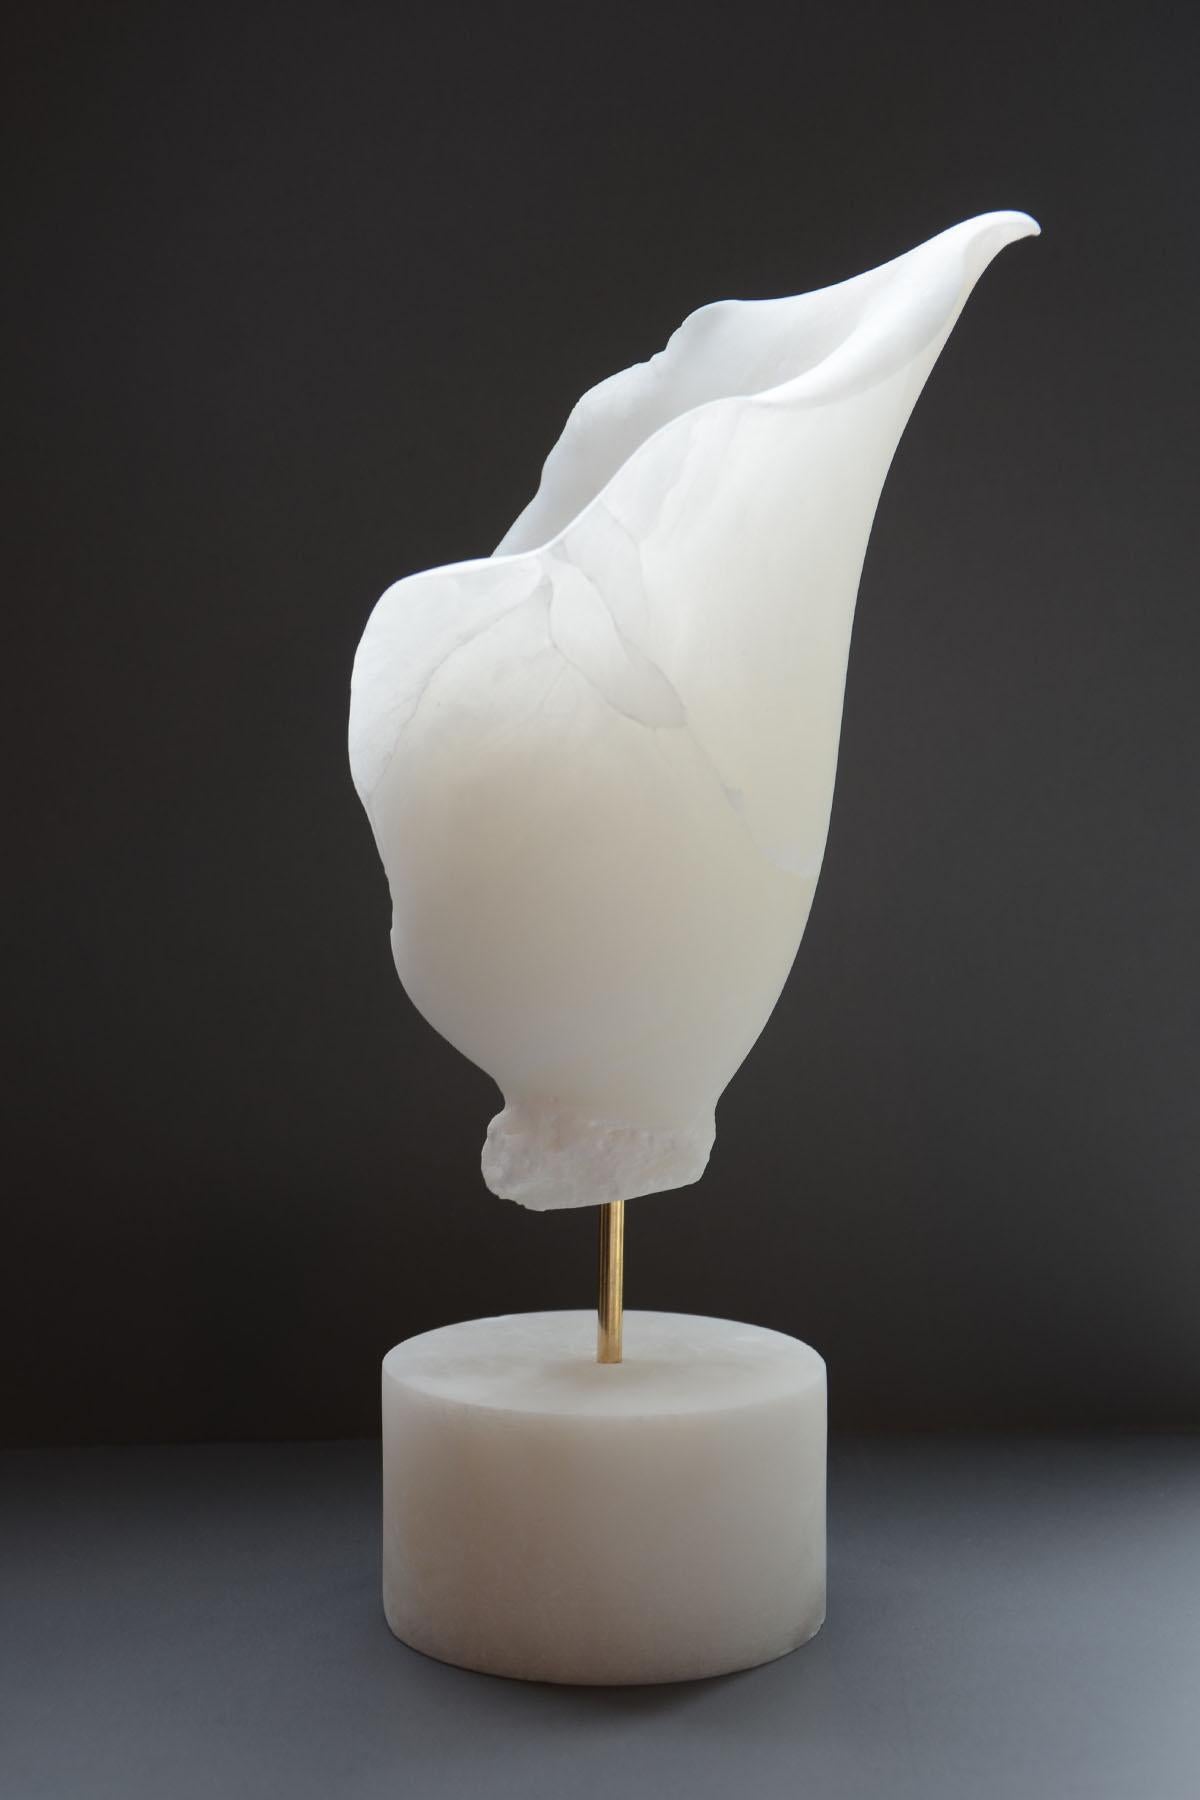 Presented is a one-of-a-kind single edition sculpture by female sculptor artist Sherry Rossini. Hand carved by the artist from alabaster stone that was imported from Italy. The base also is carved from the same imported alabaster stone. The